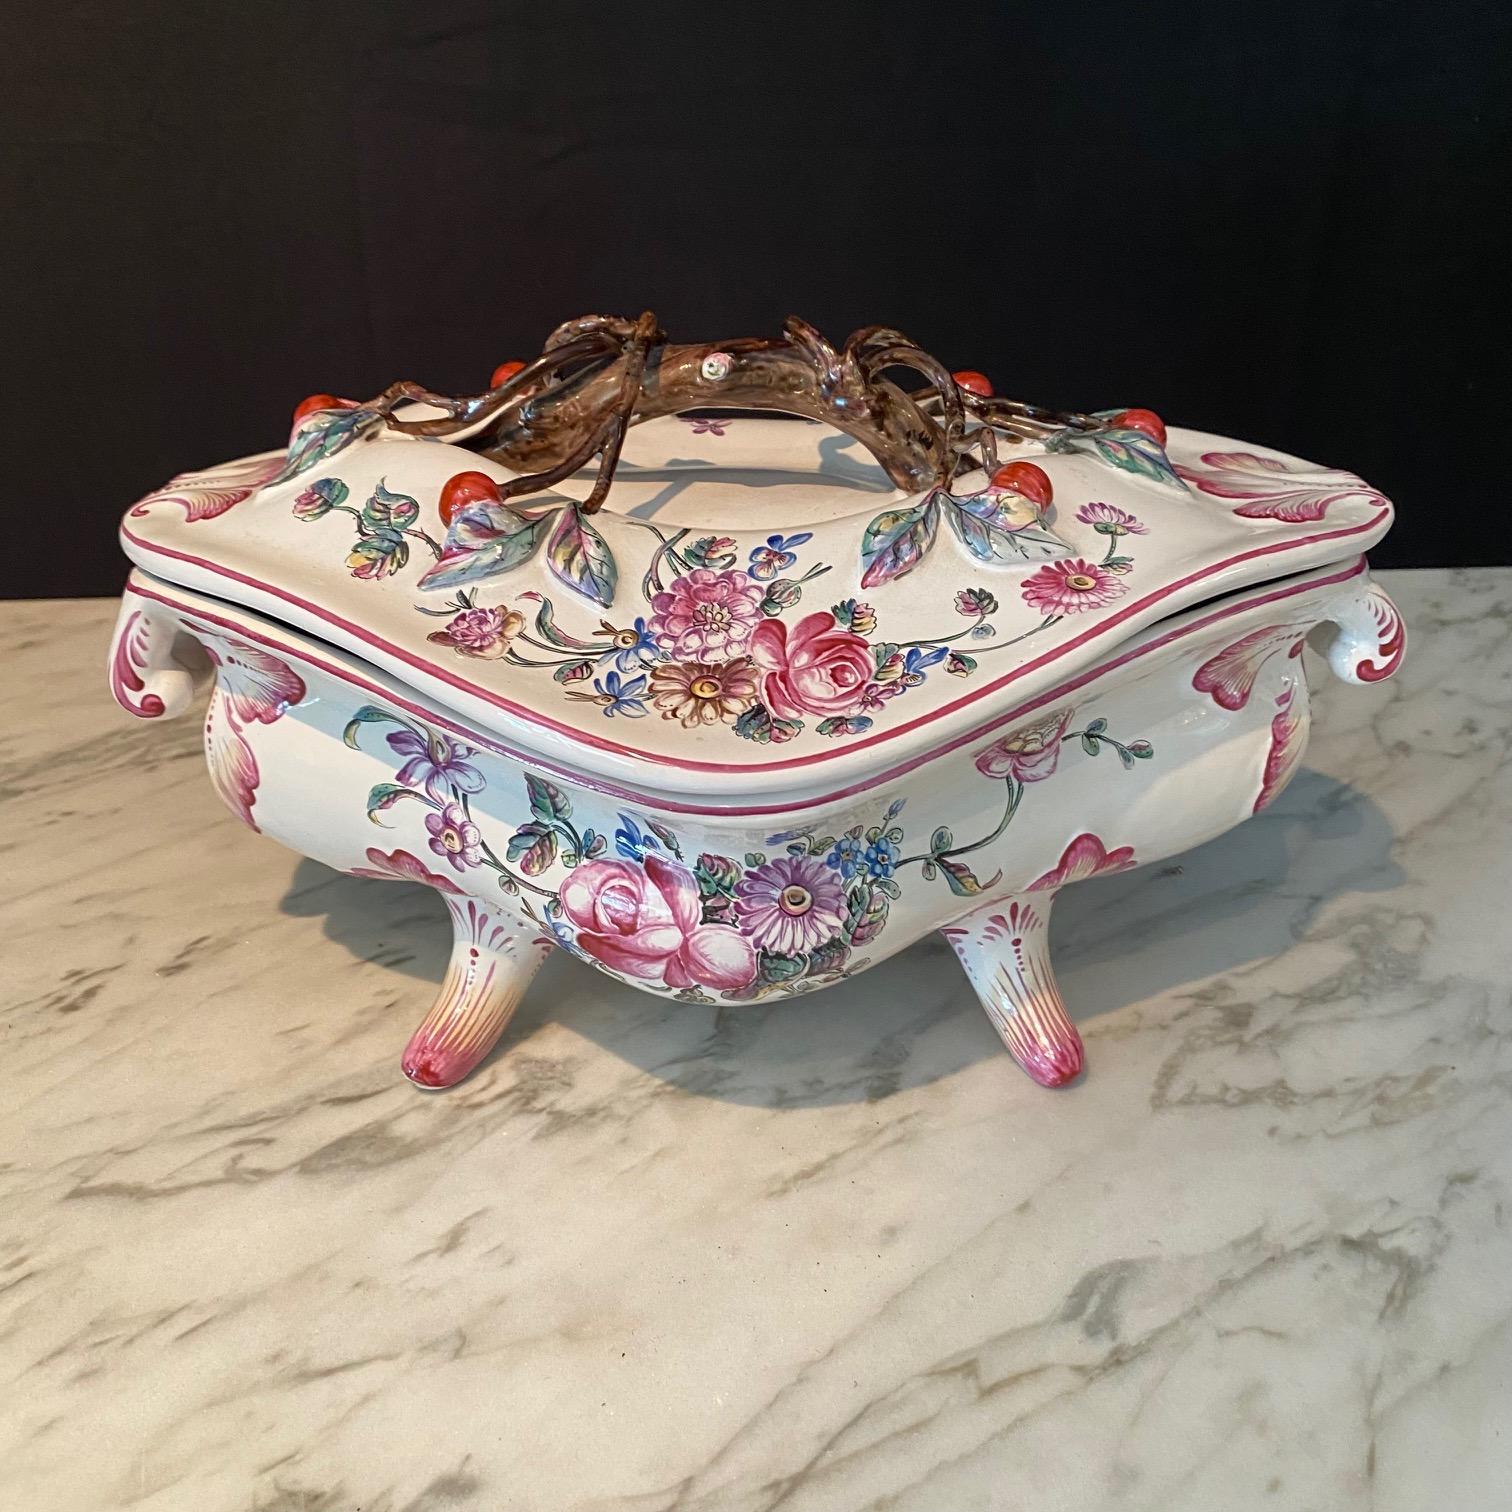 French Porcelain Barbotine Faience Majolica Jardiniere or Tureen and Platter  For Sale 3